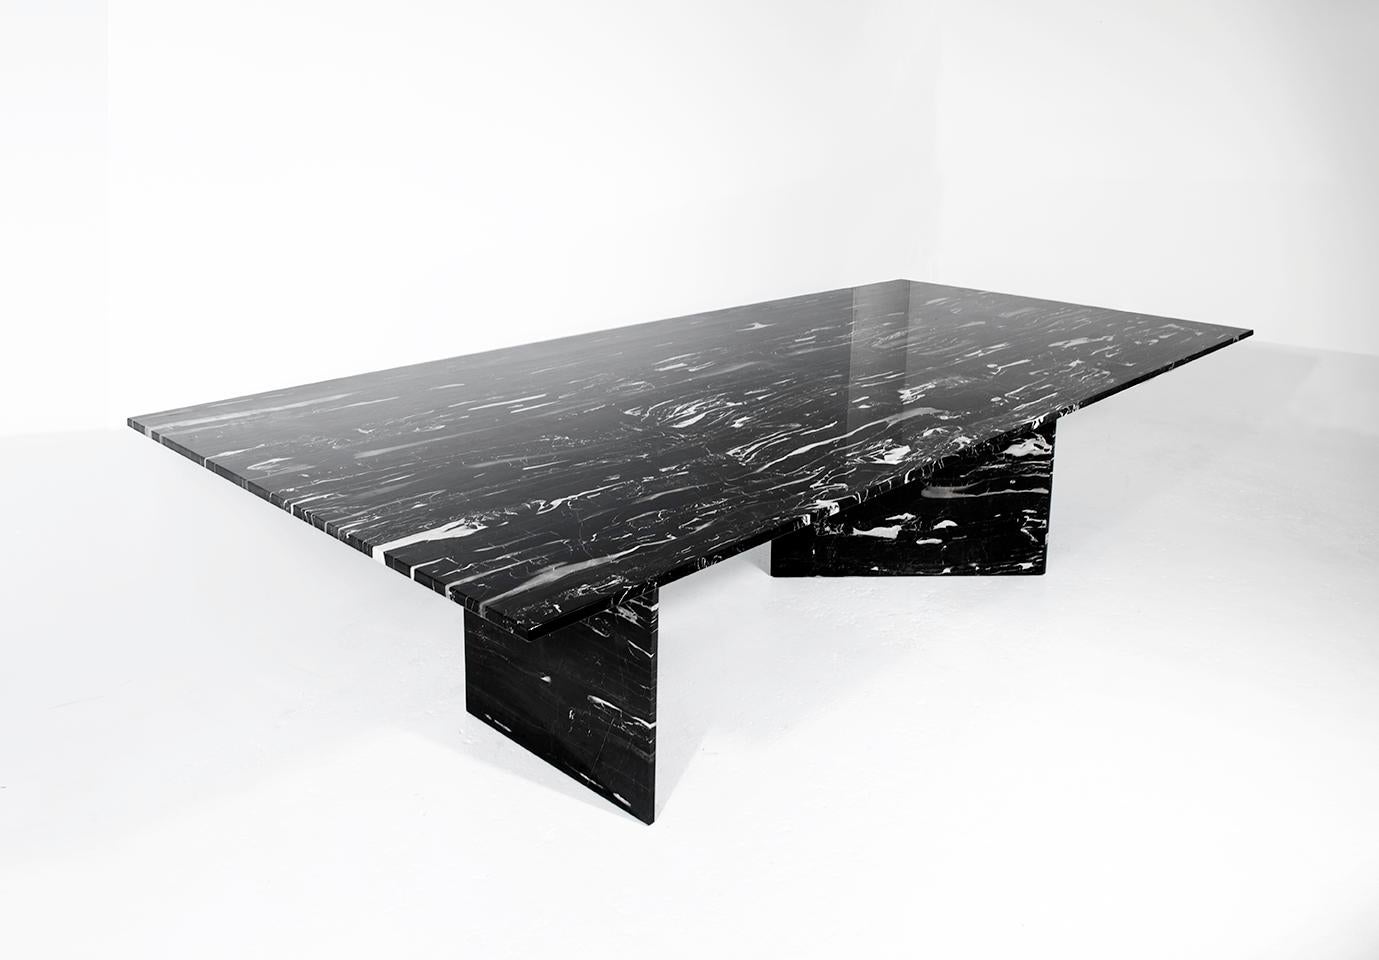 This table combines the beauty of marble with a twist of suspense. The triangular legs create for several differing view points where the table in turn feels as if it is supported by the thinnest blades of marble prompting a sense of disbelief yet